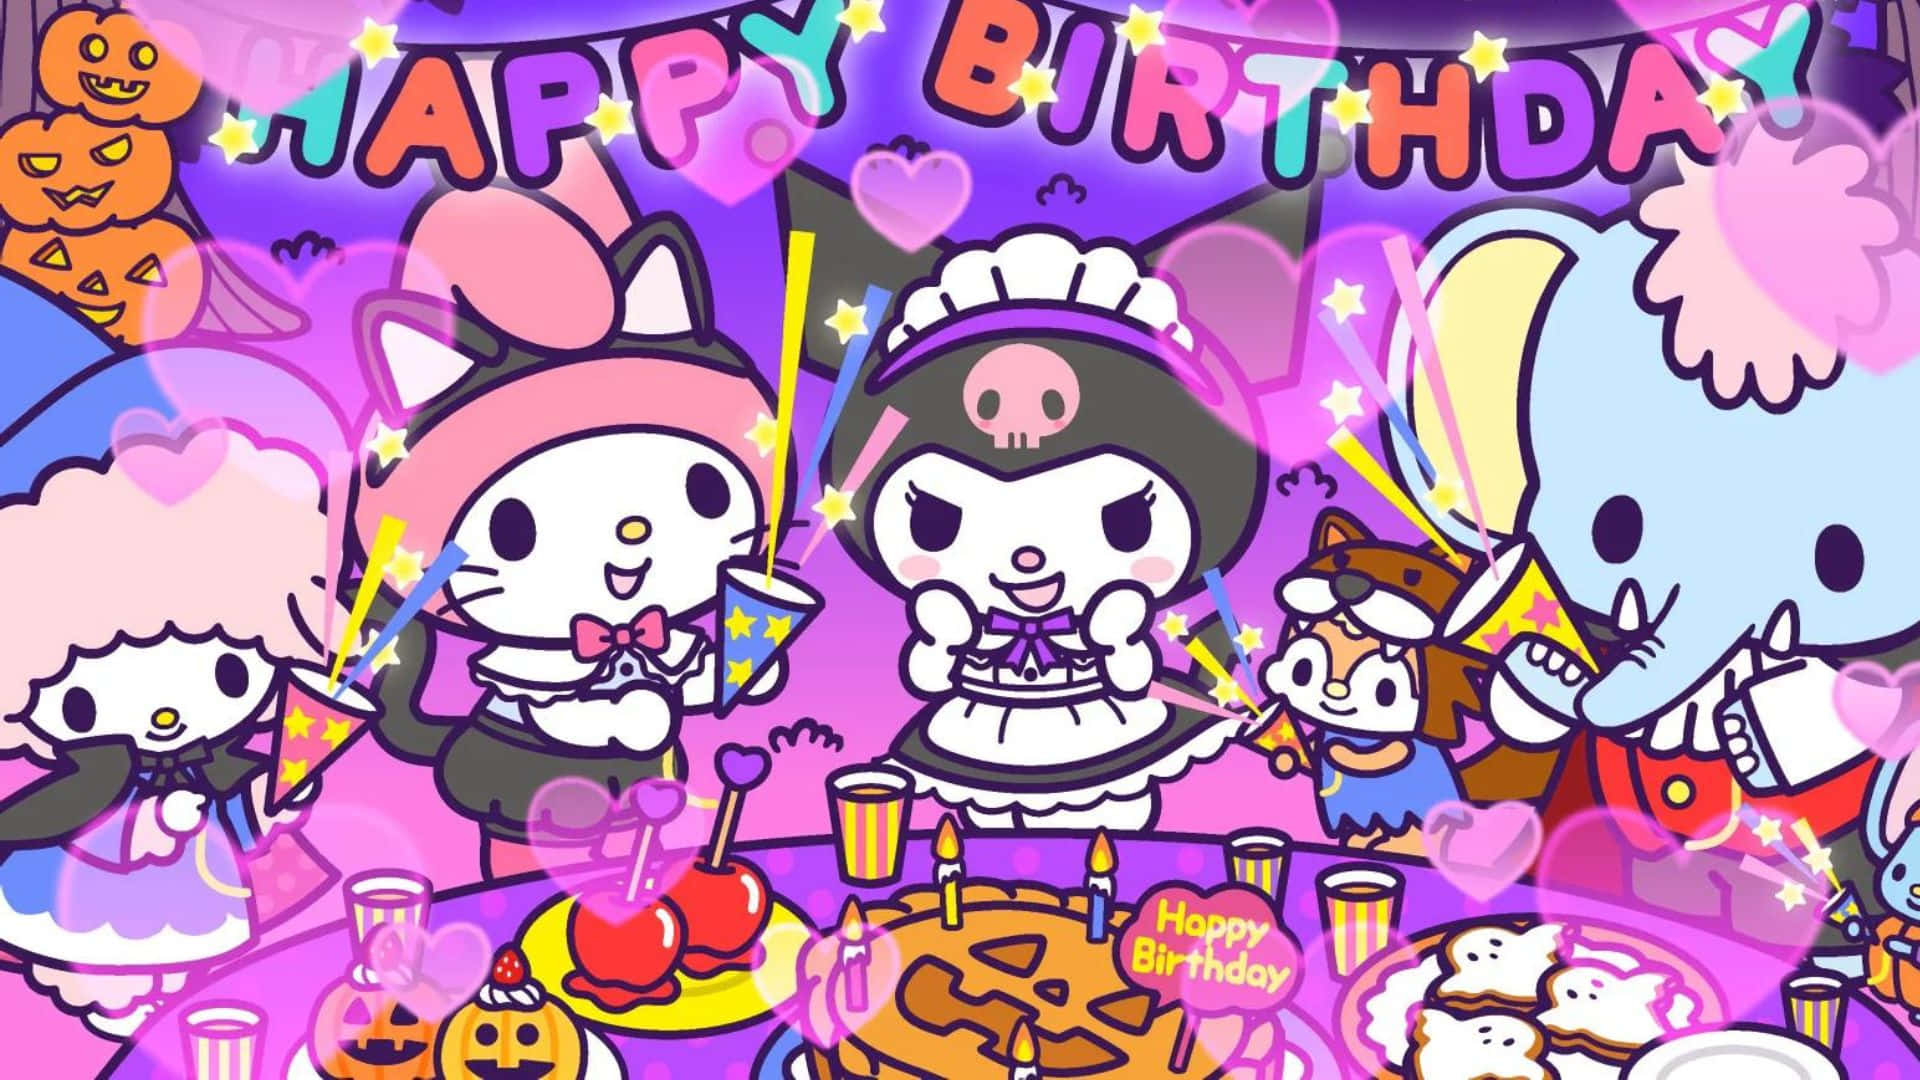 Caption: Celebrate Kuromi's Birthday with this Adorable Wallpaper Wallpaper